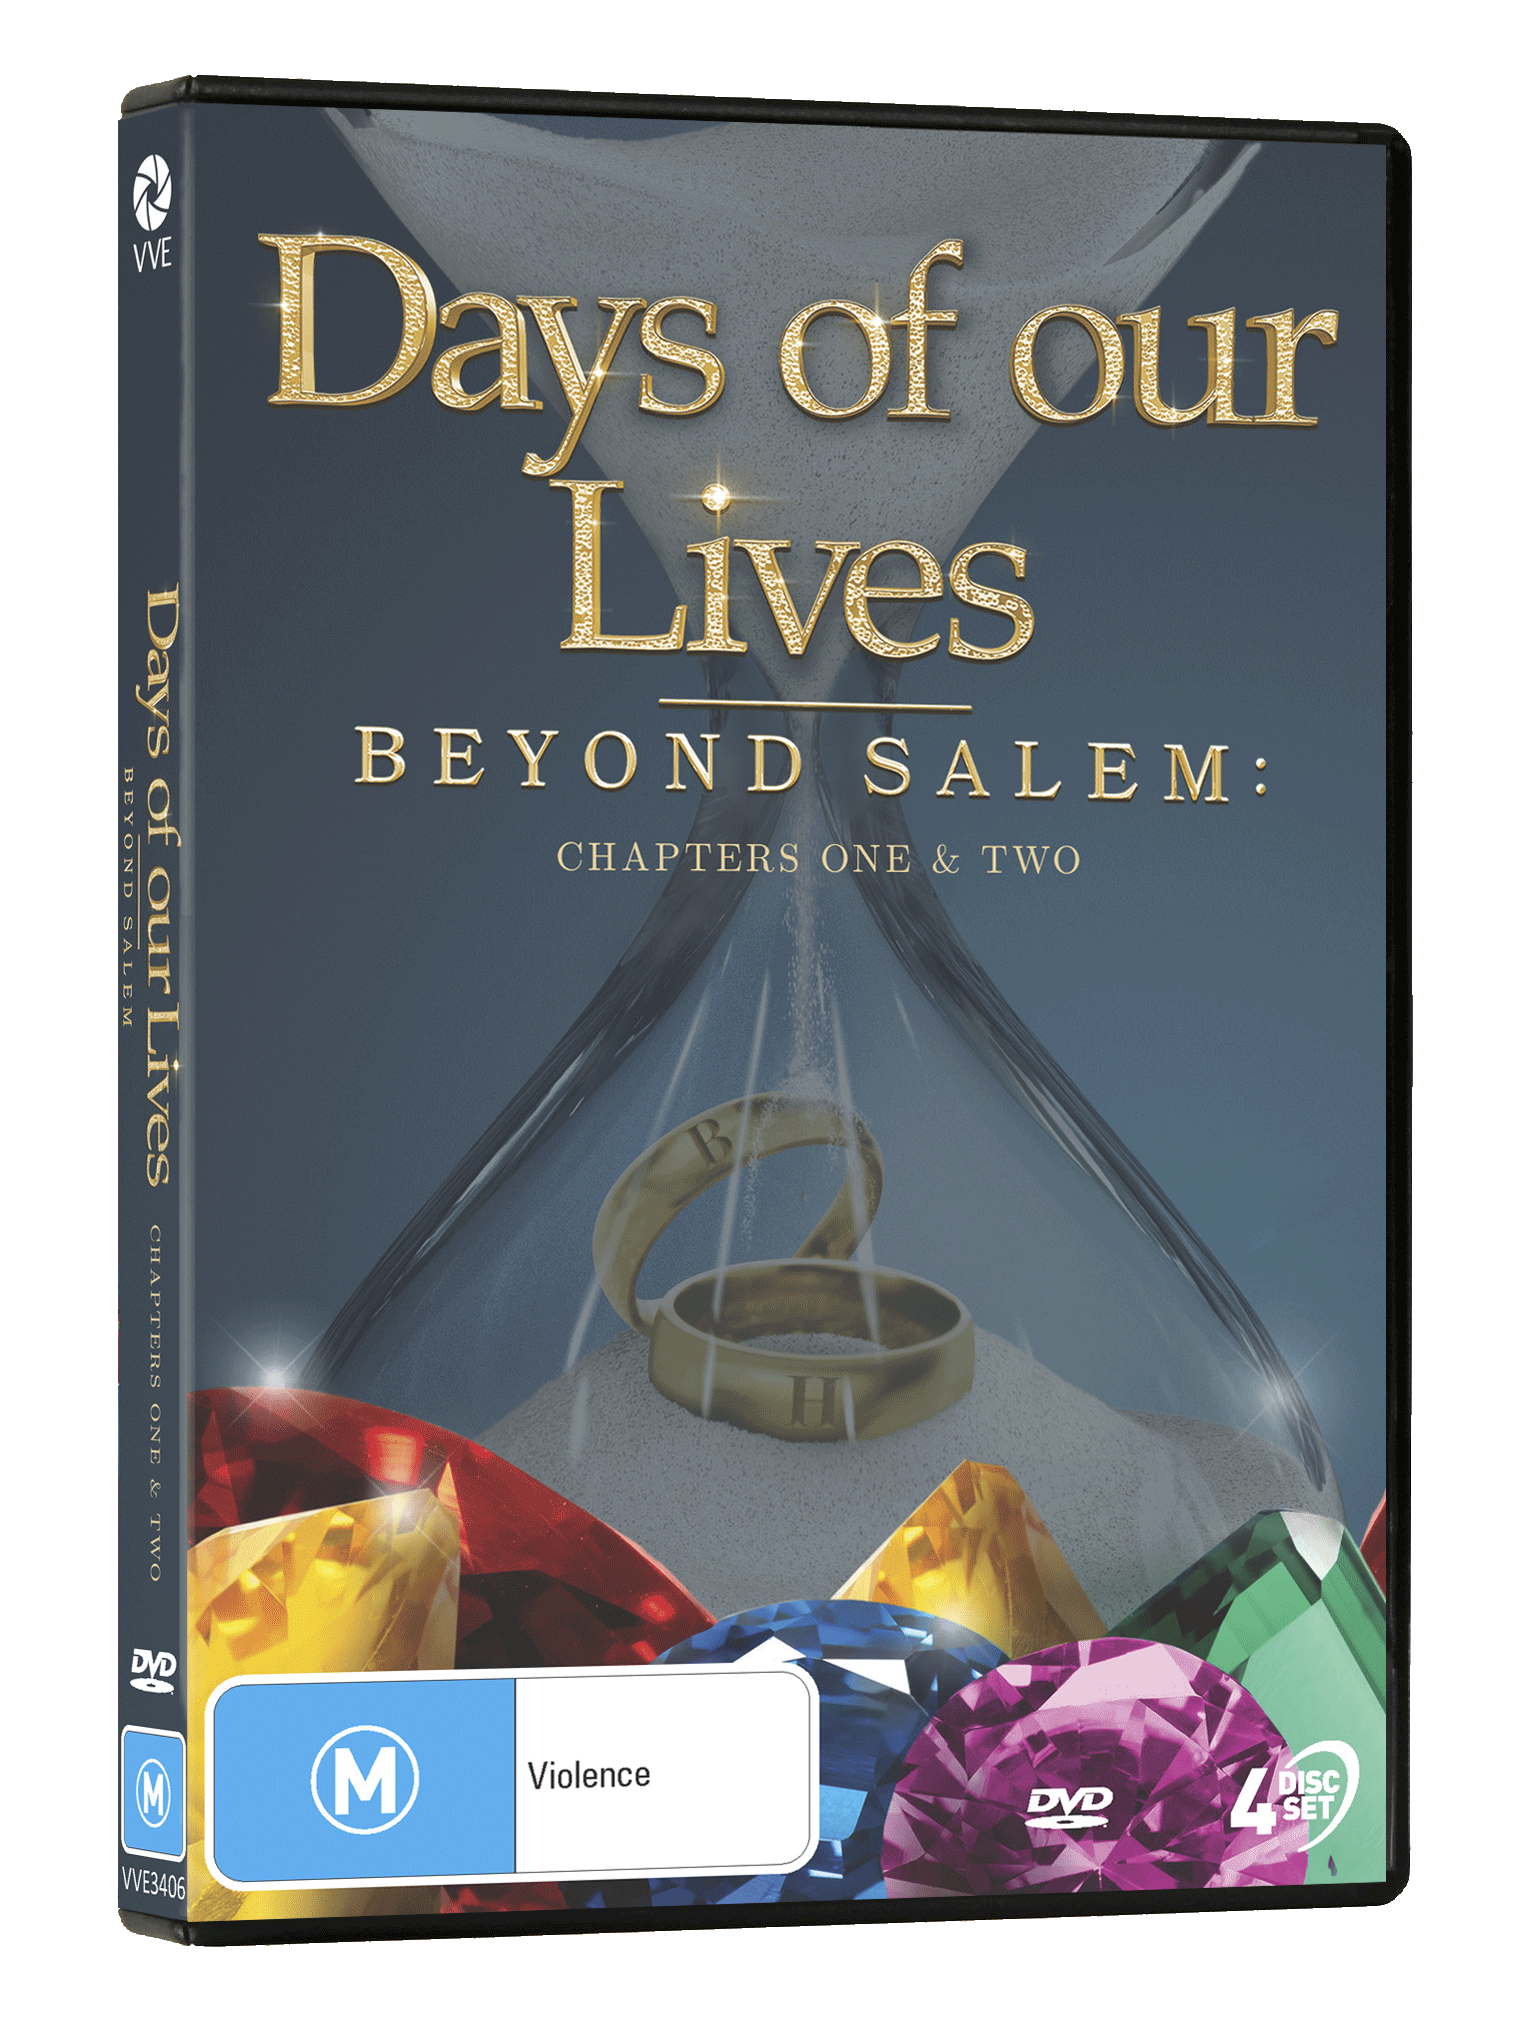 days-of-our-lives-beyond-salem-chapters-one-two-via-vision